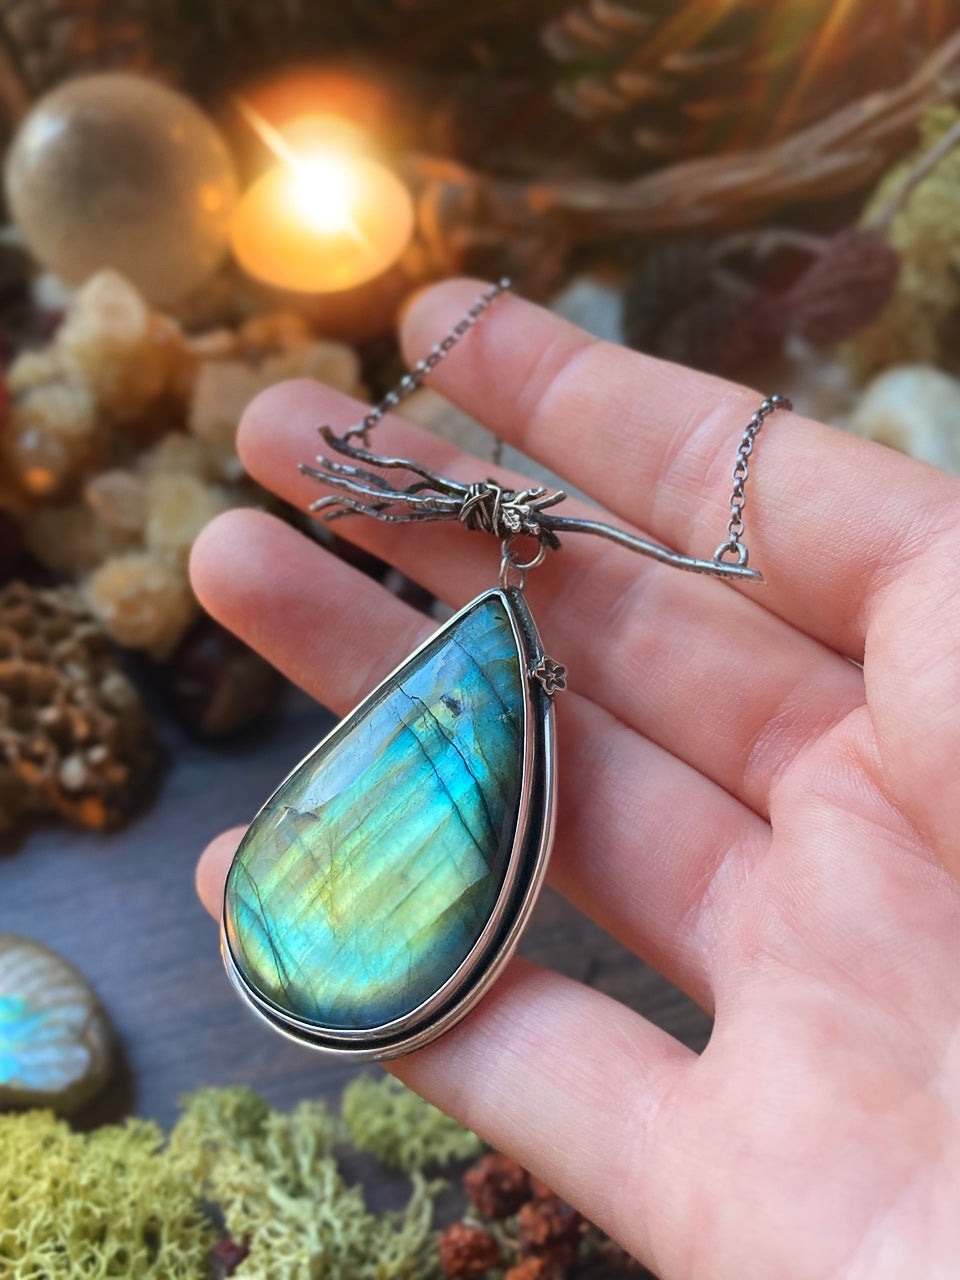 REBORN IN COLOUR Handmade Sterling Silver Broomstick Necklace with Labradorite